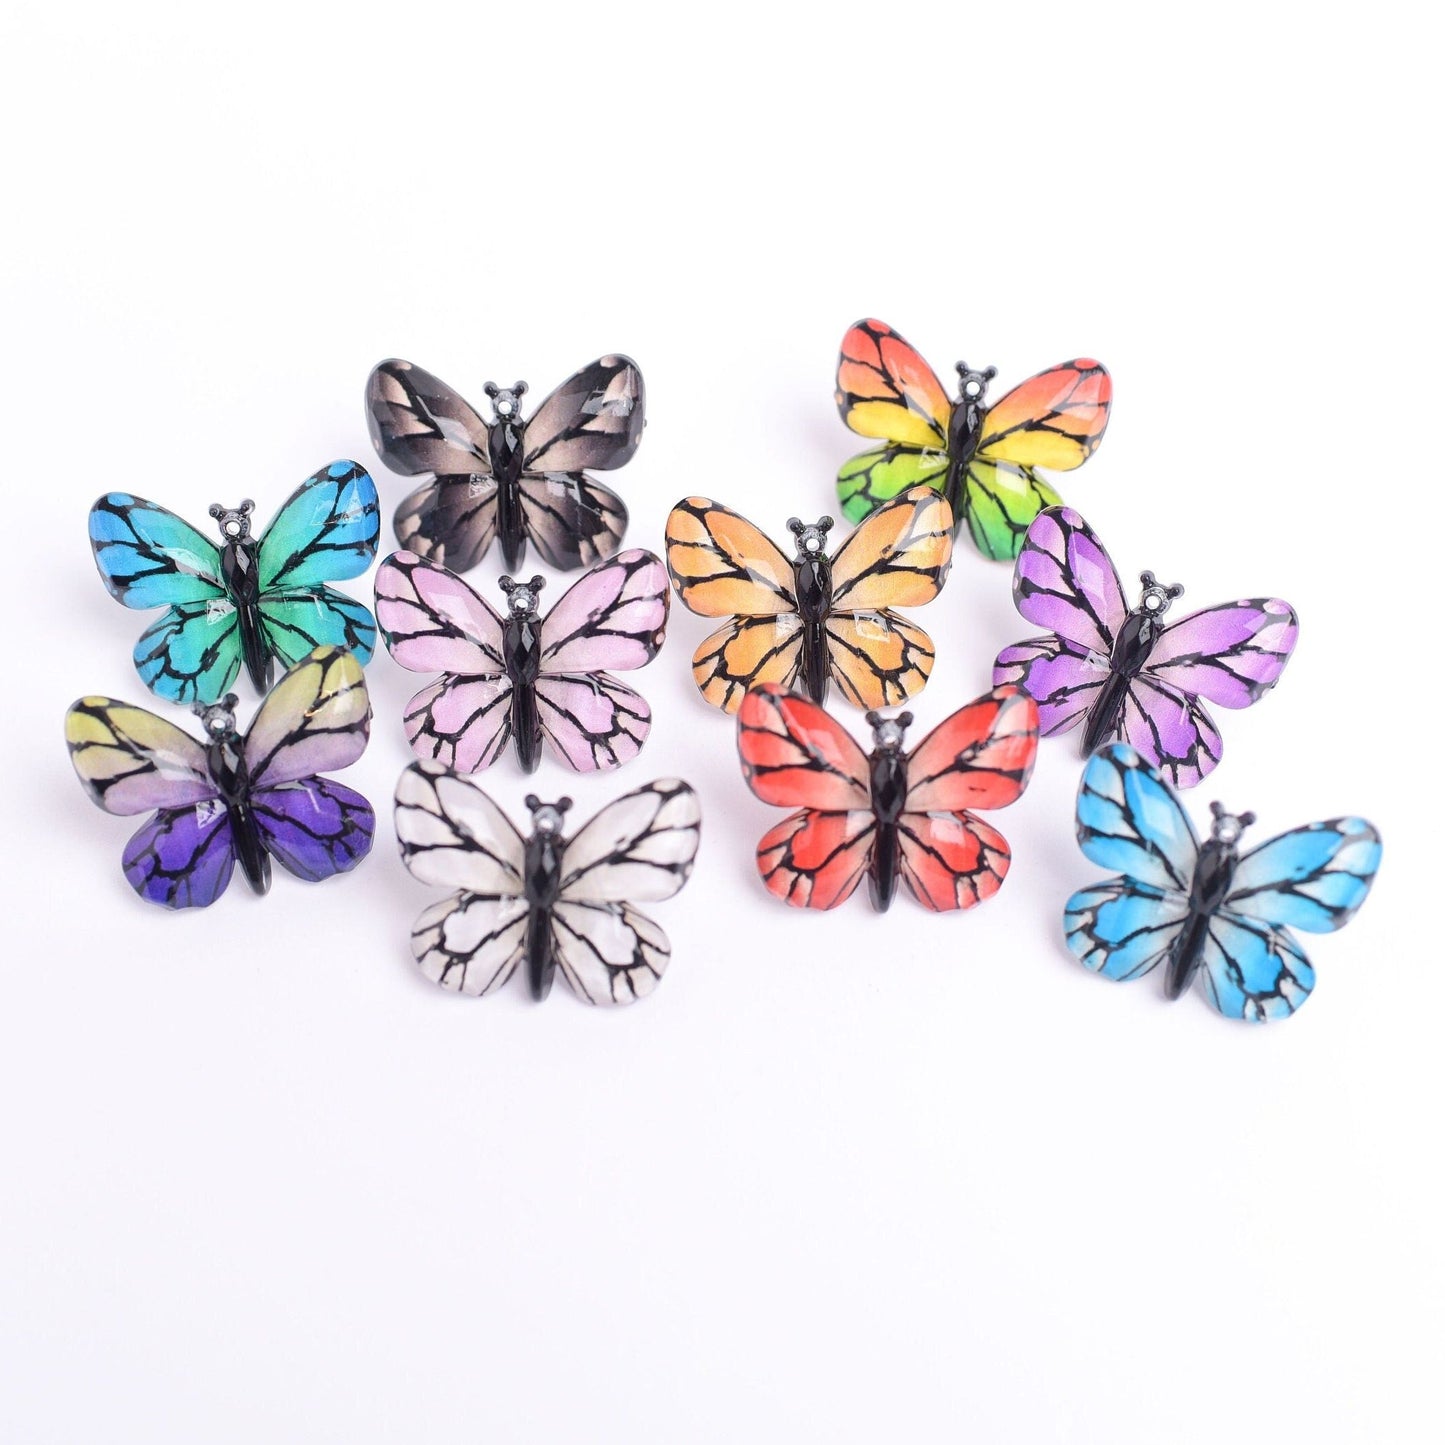 Vibrant Butterfly Push Pins or Magnets- Set of 10